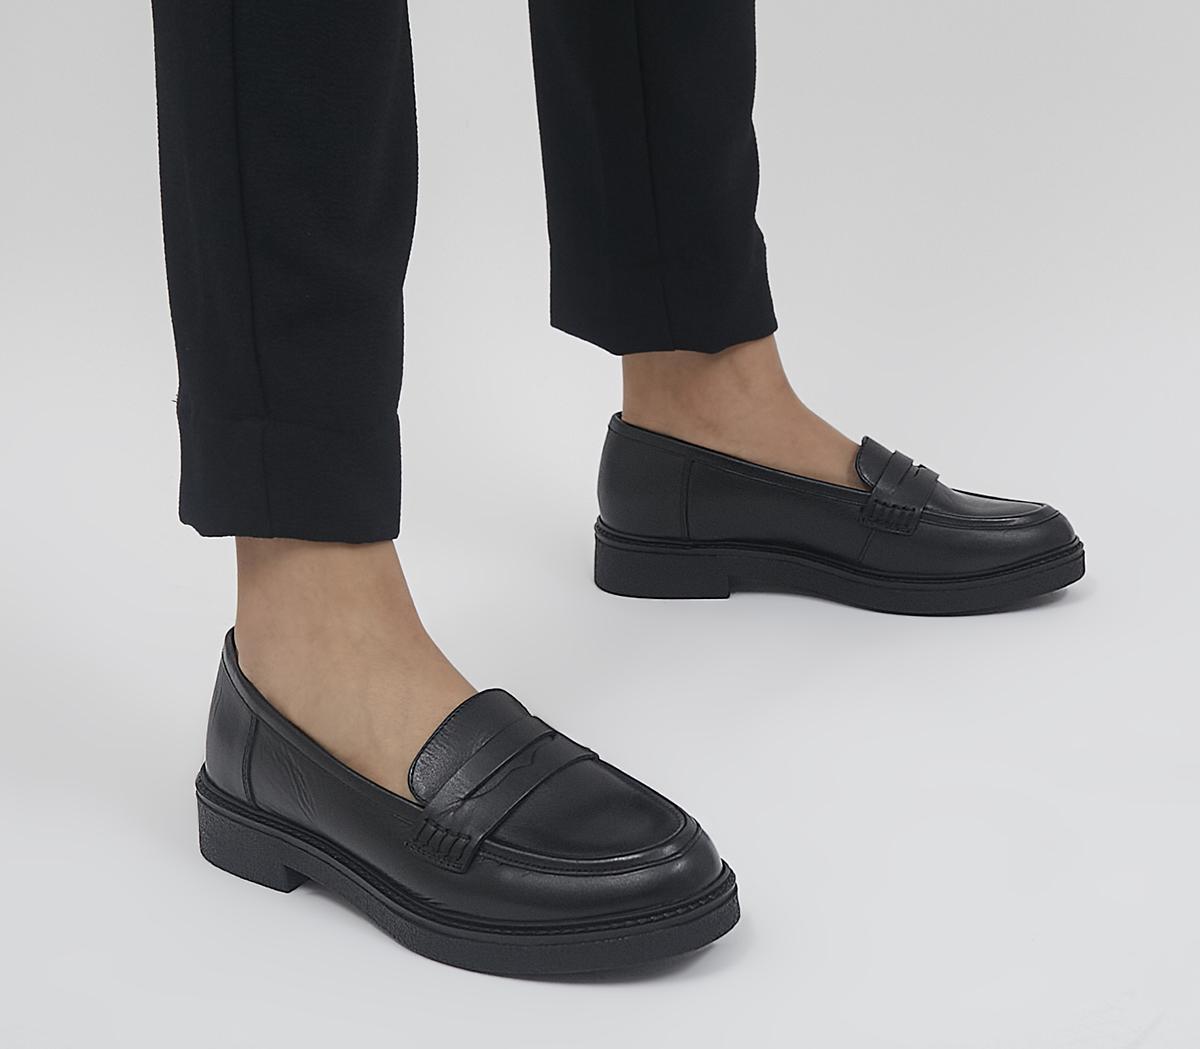 OfficeFilter Smooth Sole LoafersBlack Leather